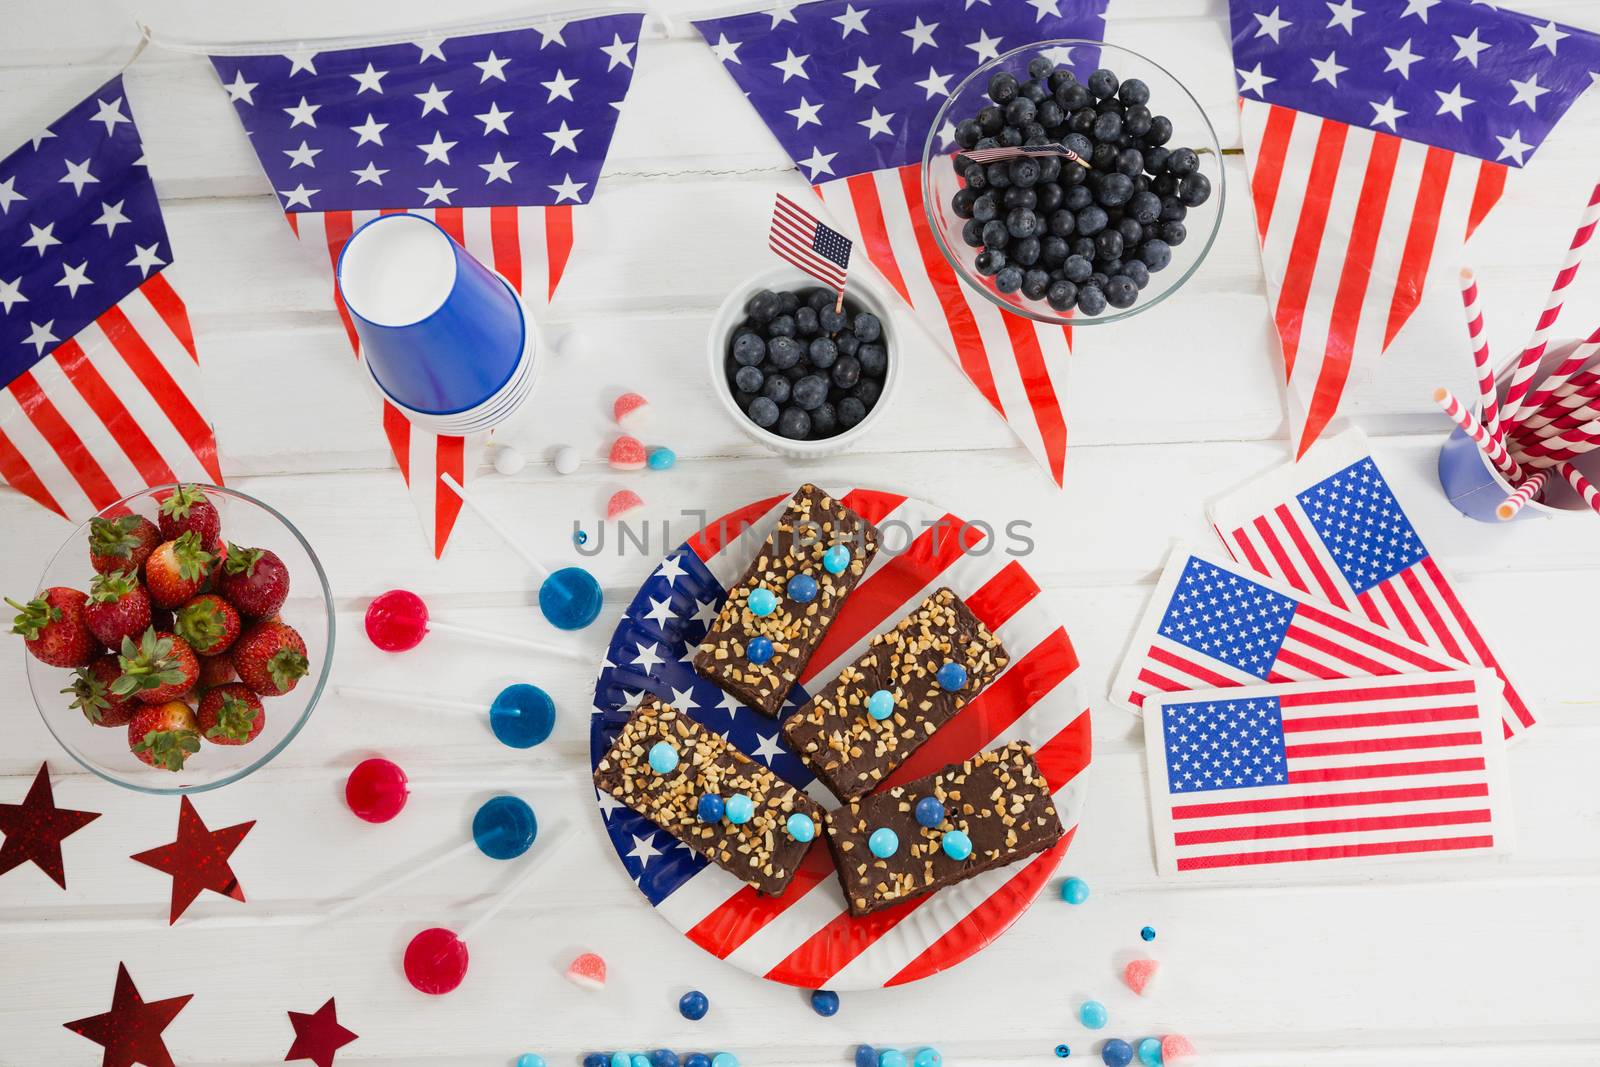 Sweet food and fruits decorated with 4th july theme by Wavebreakmedia